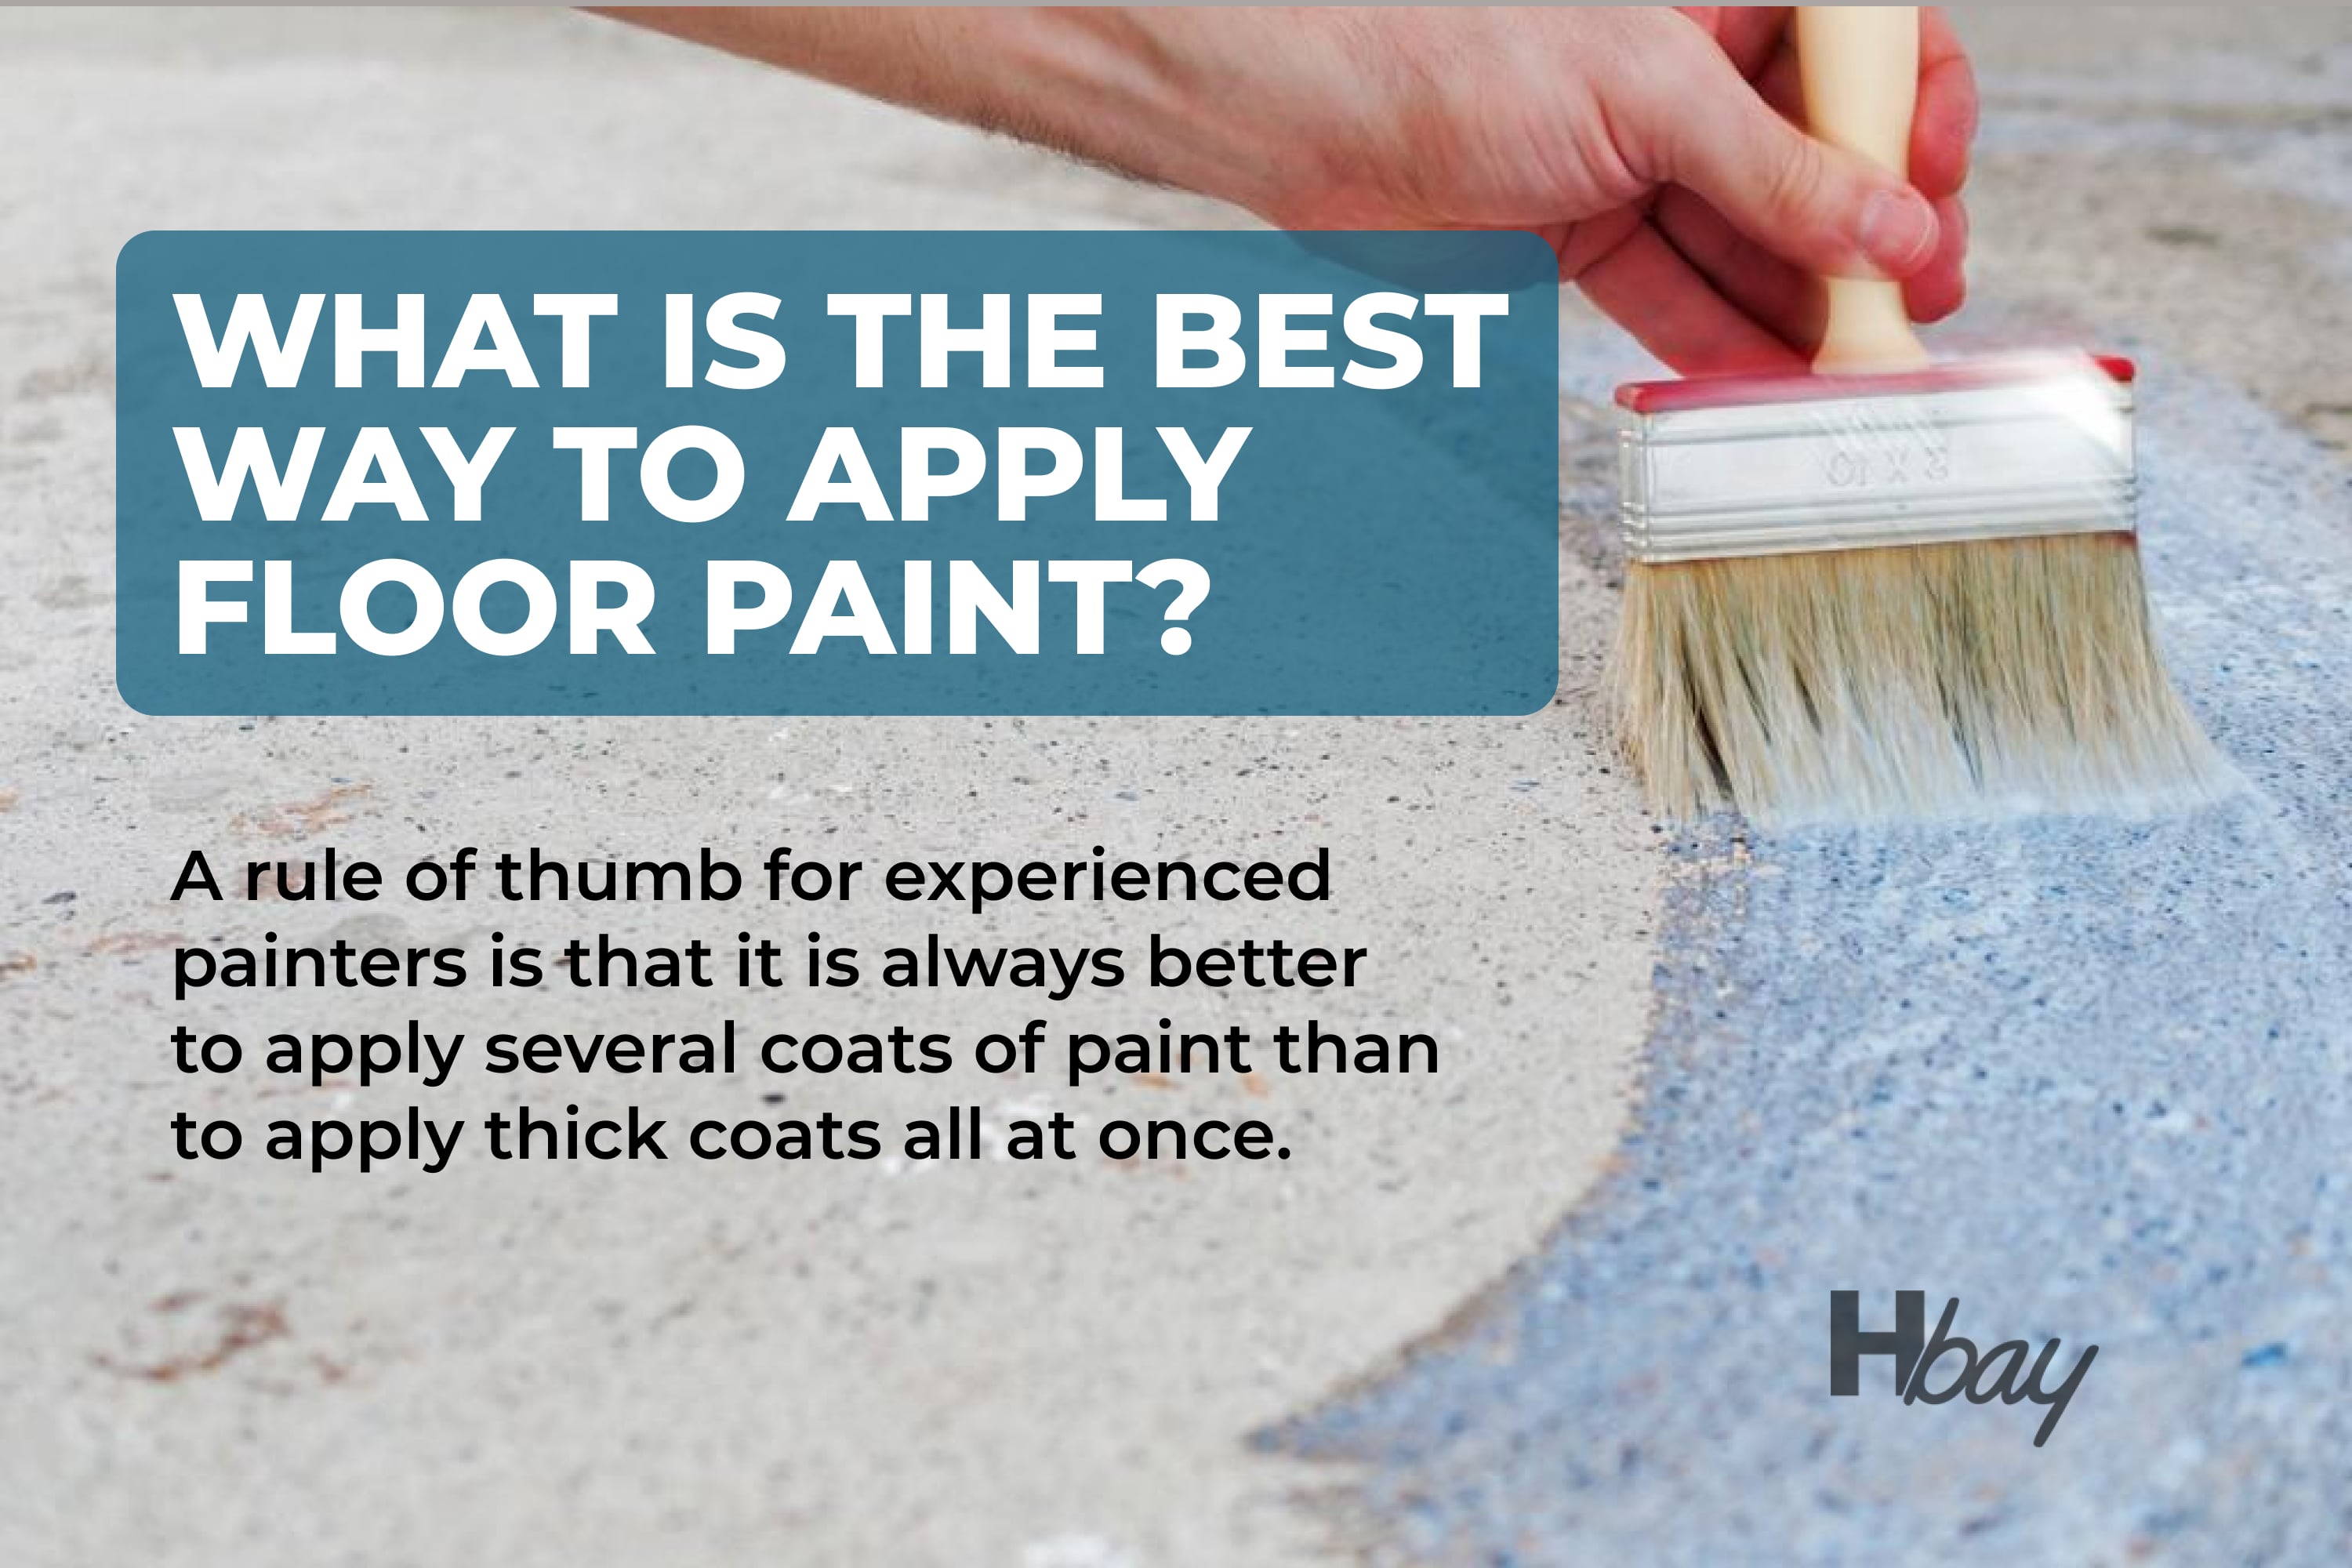 What is the best way to apply floor paint